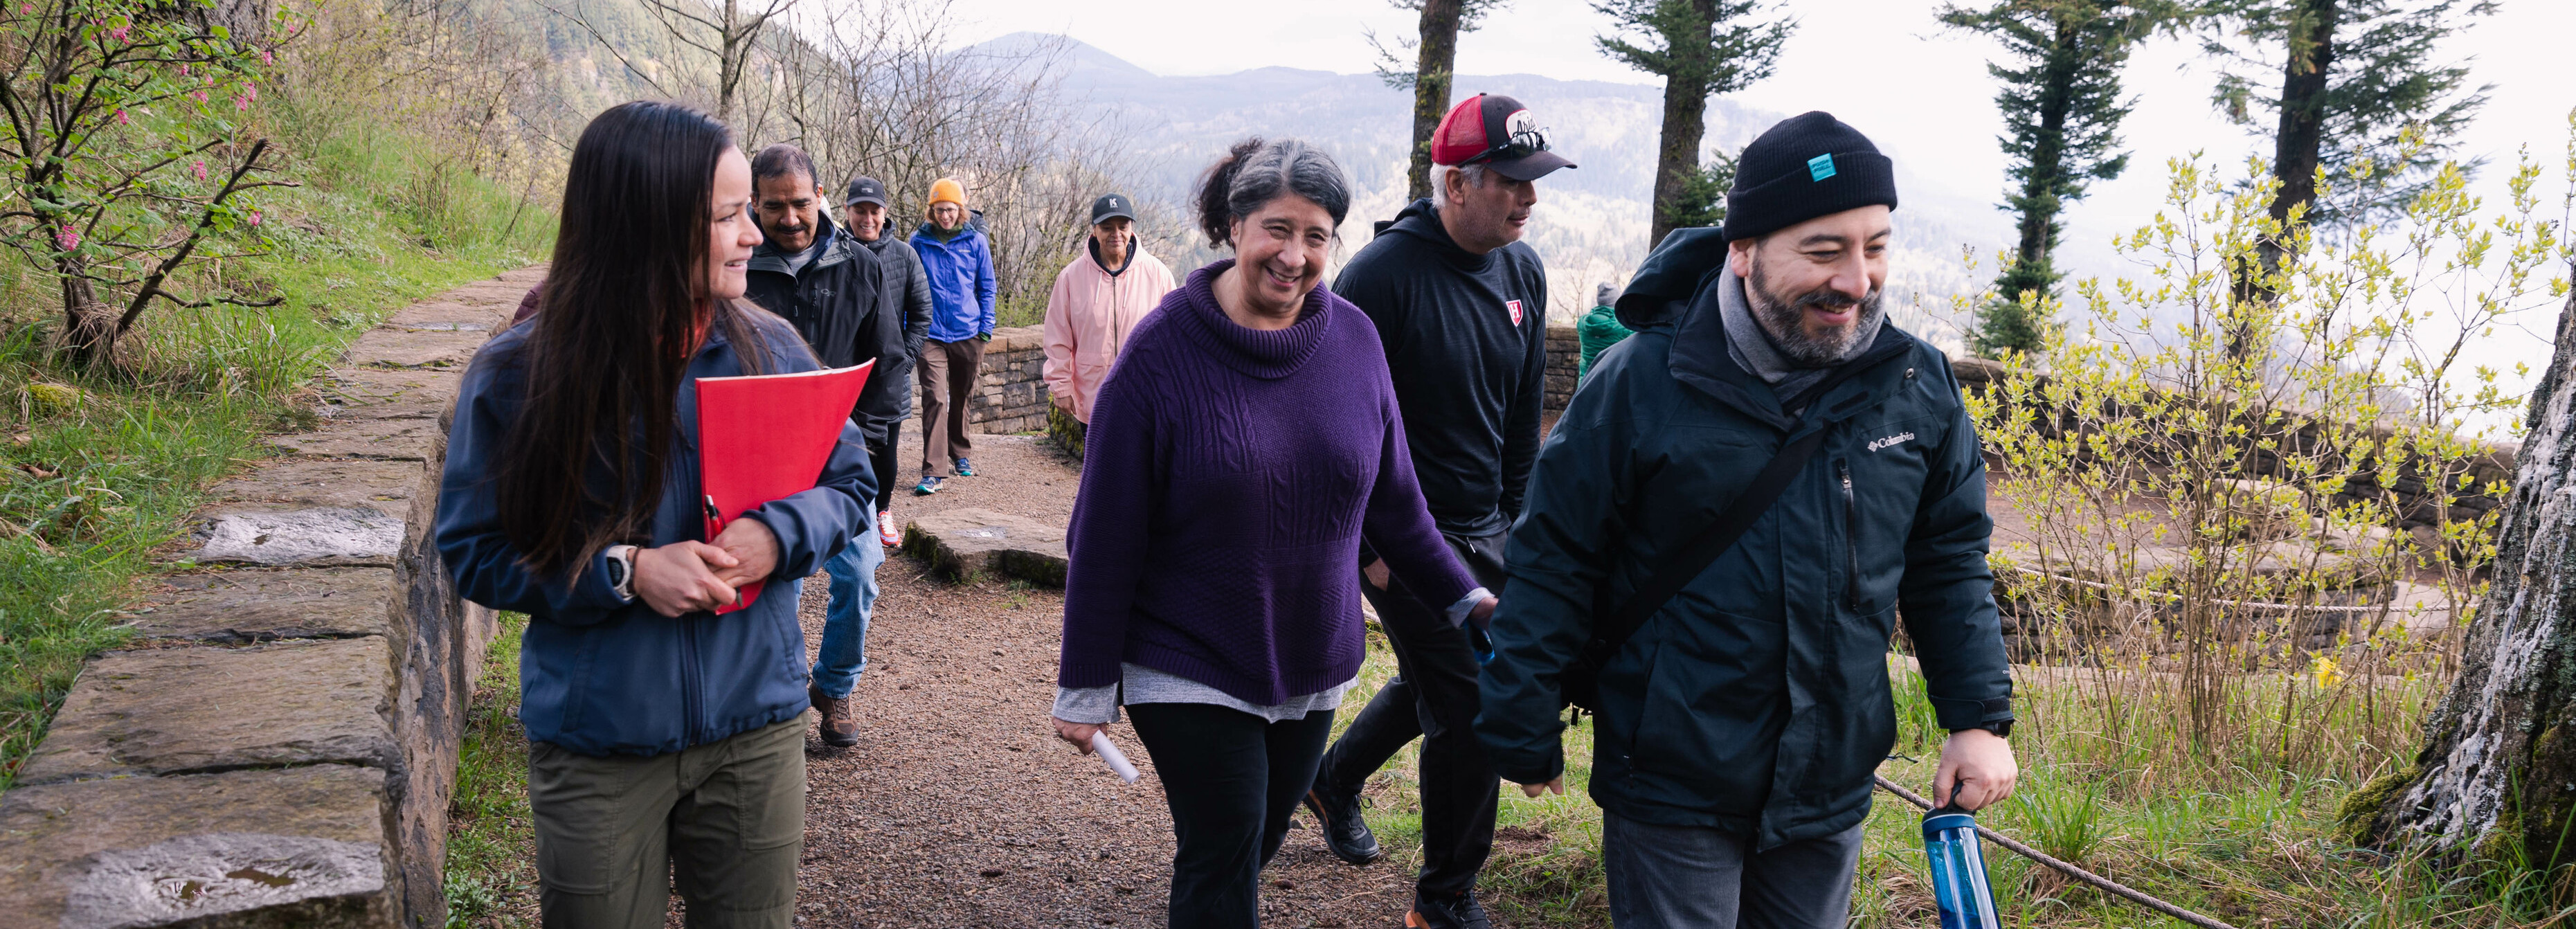 New Ways to Connect and Care for the Gorge